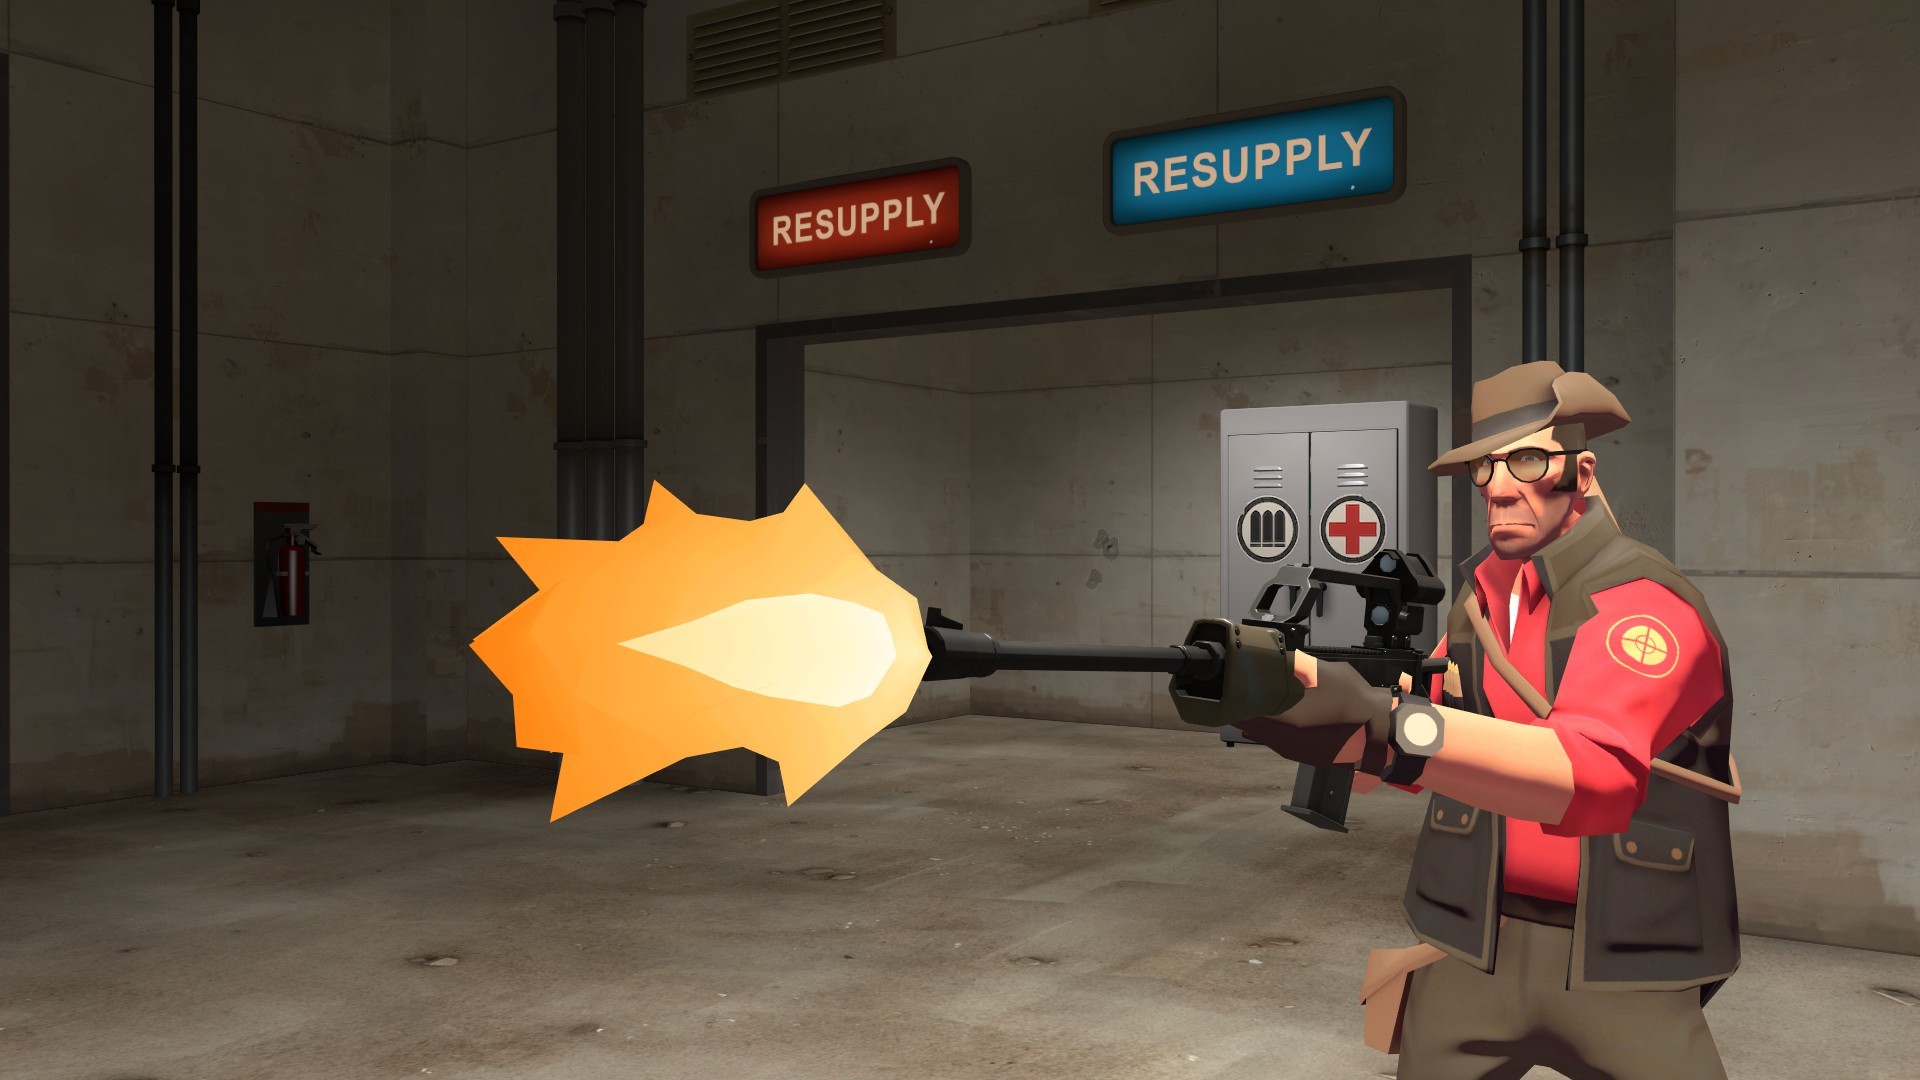 Team Fortress 2 Flash Game